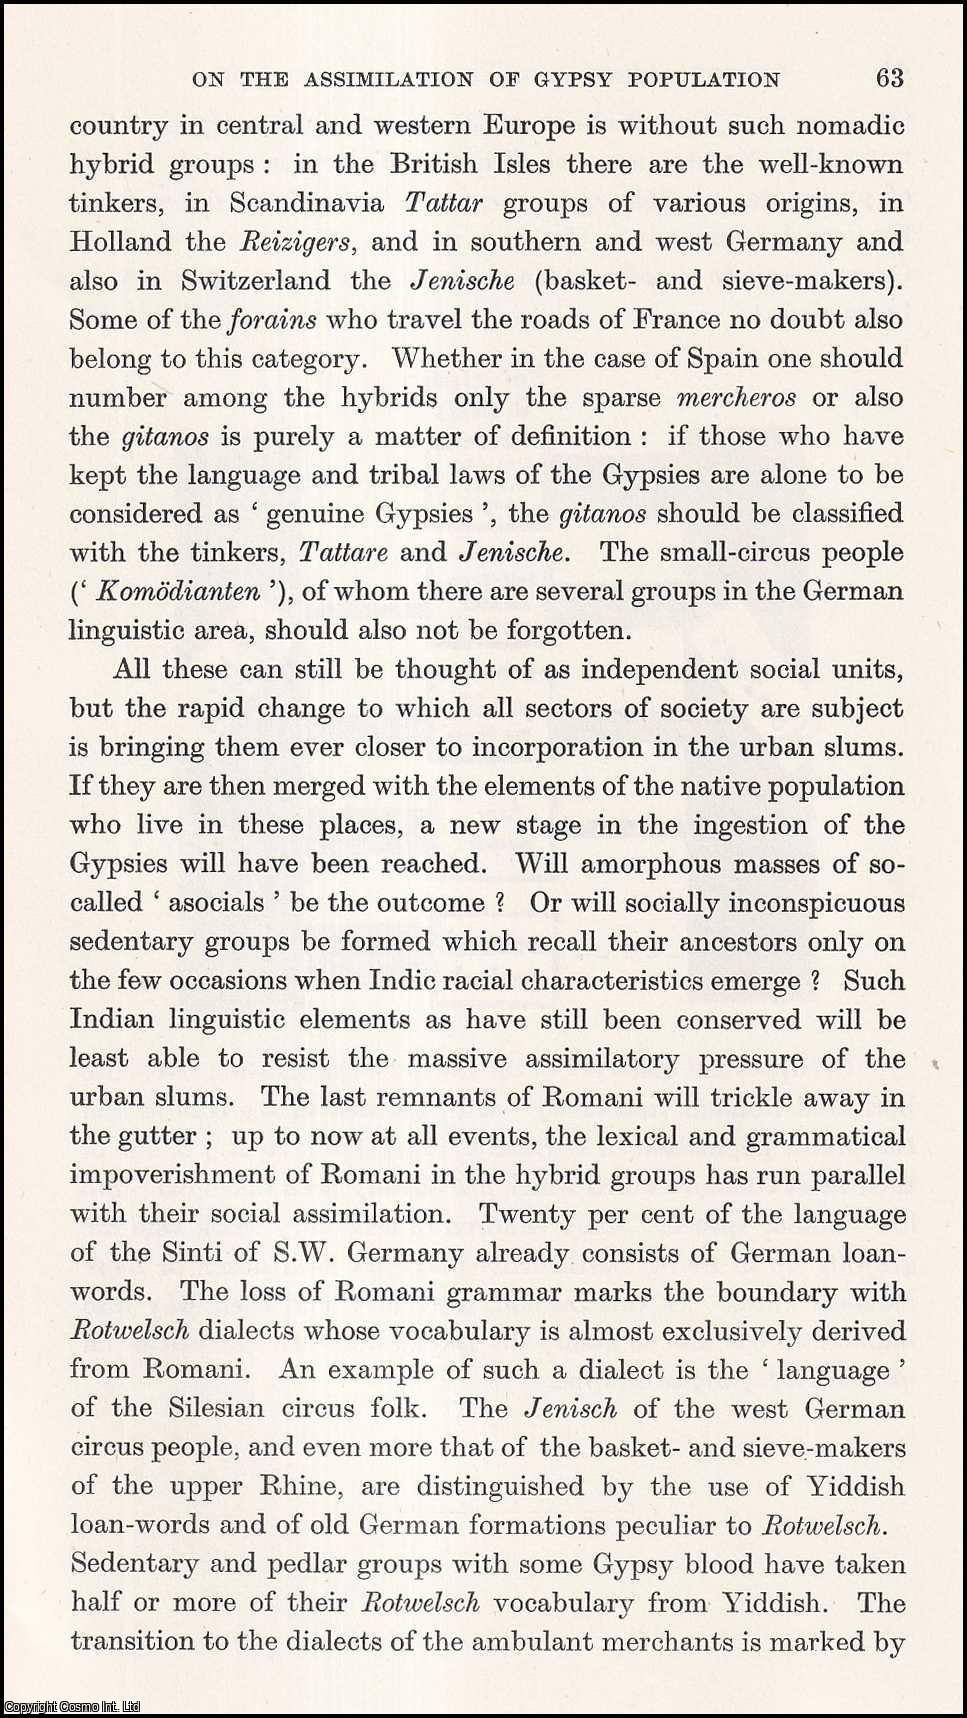 Dr Hermann Arnold - The Assimilation of Gypsy Population and Speech in Central Europe. An uncommon original article from the Journal of the Gypsy Lore Society, 1970.